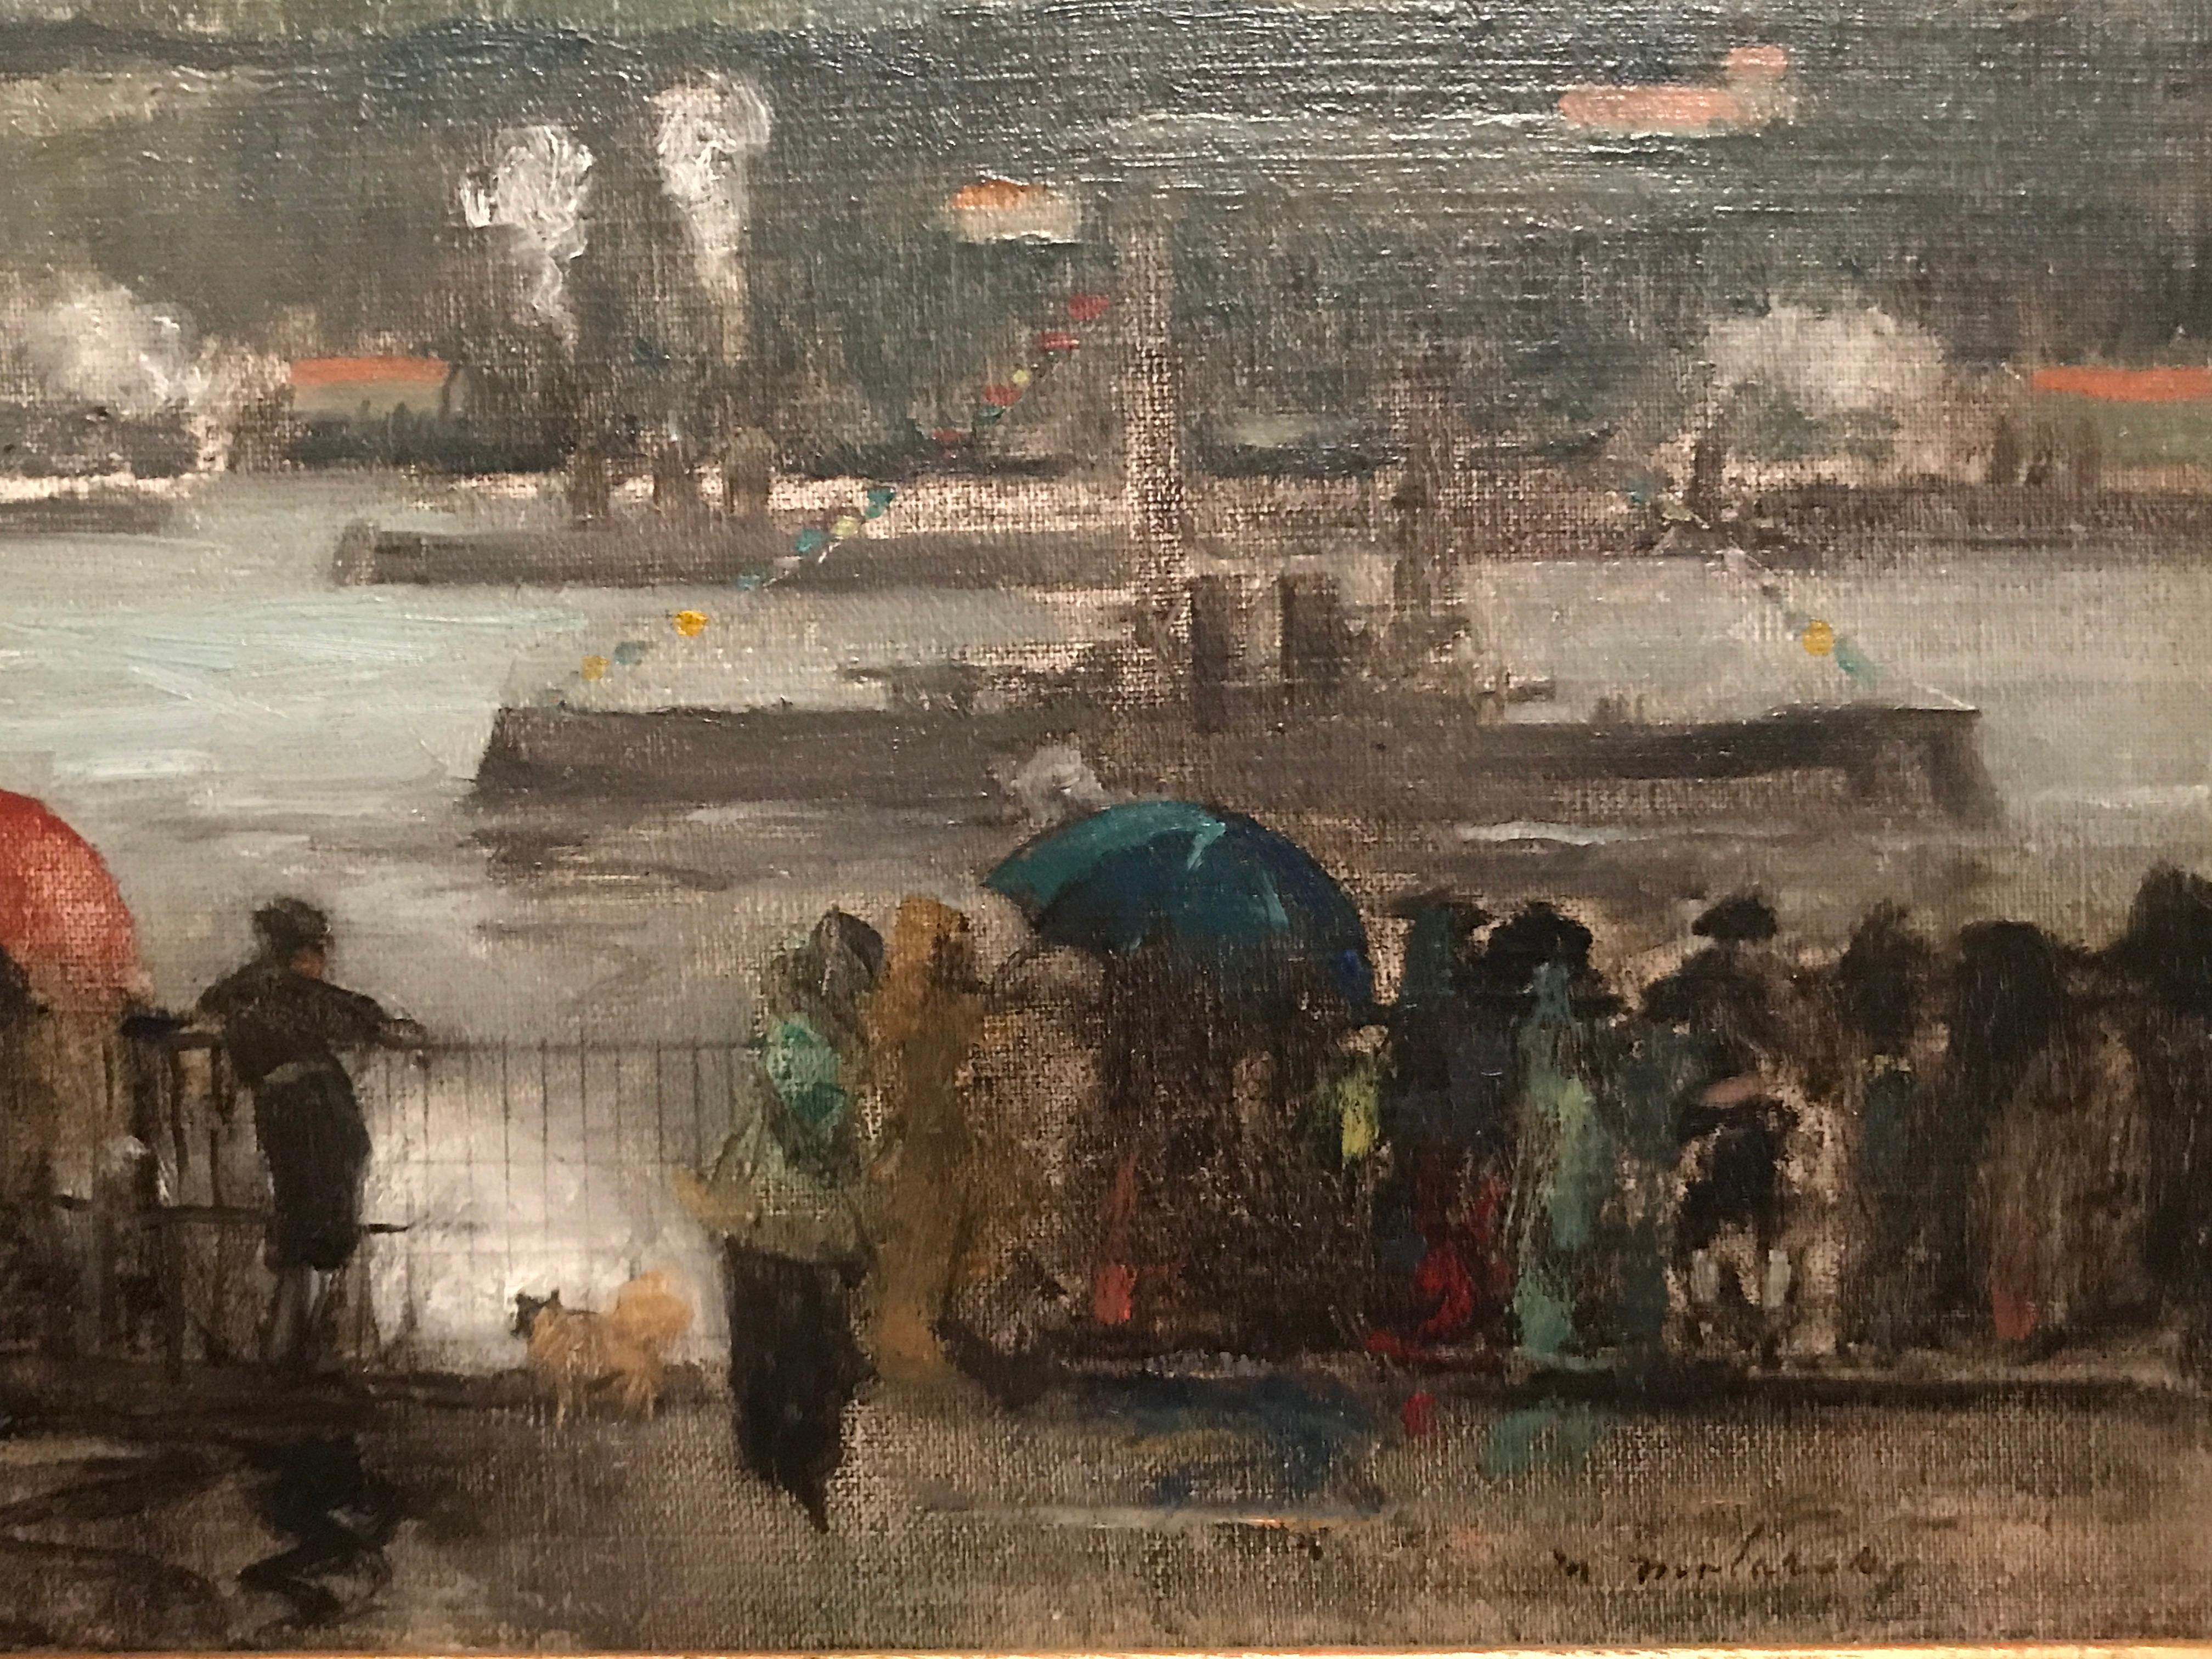 Return of the Fleet - Rainy Day along the Hudson - Painting by Maurice Molarsky